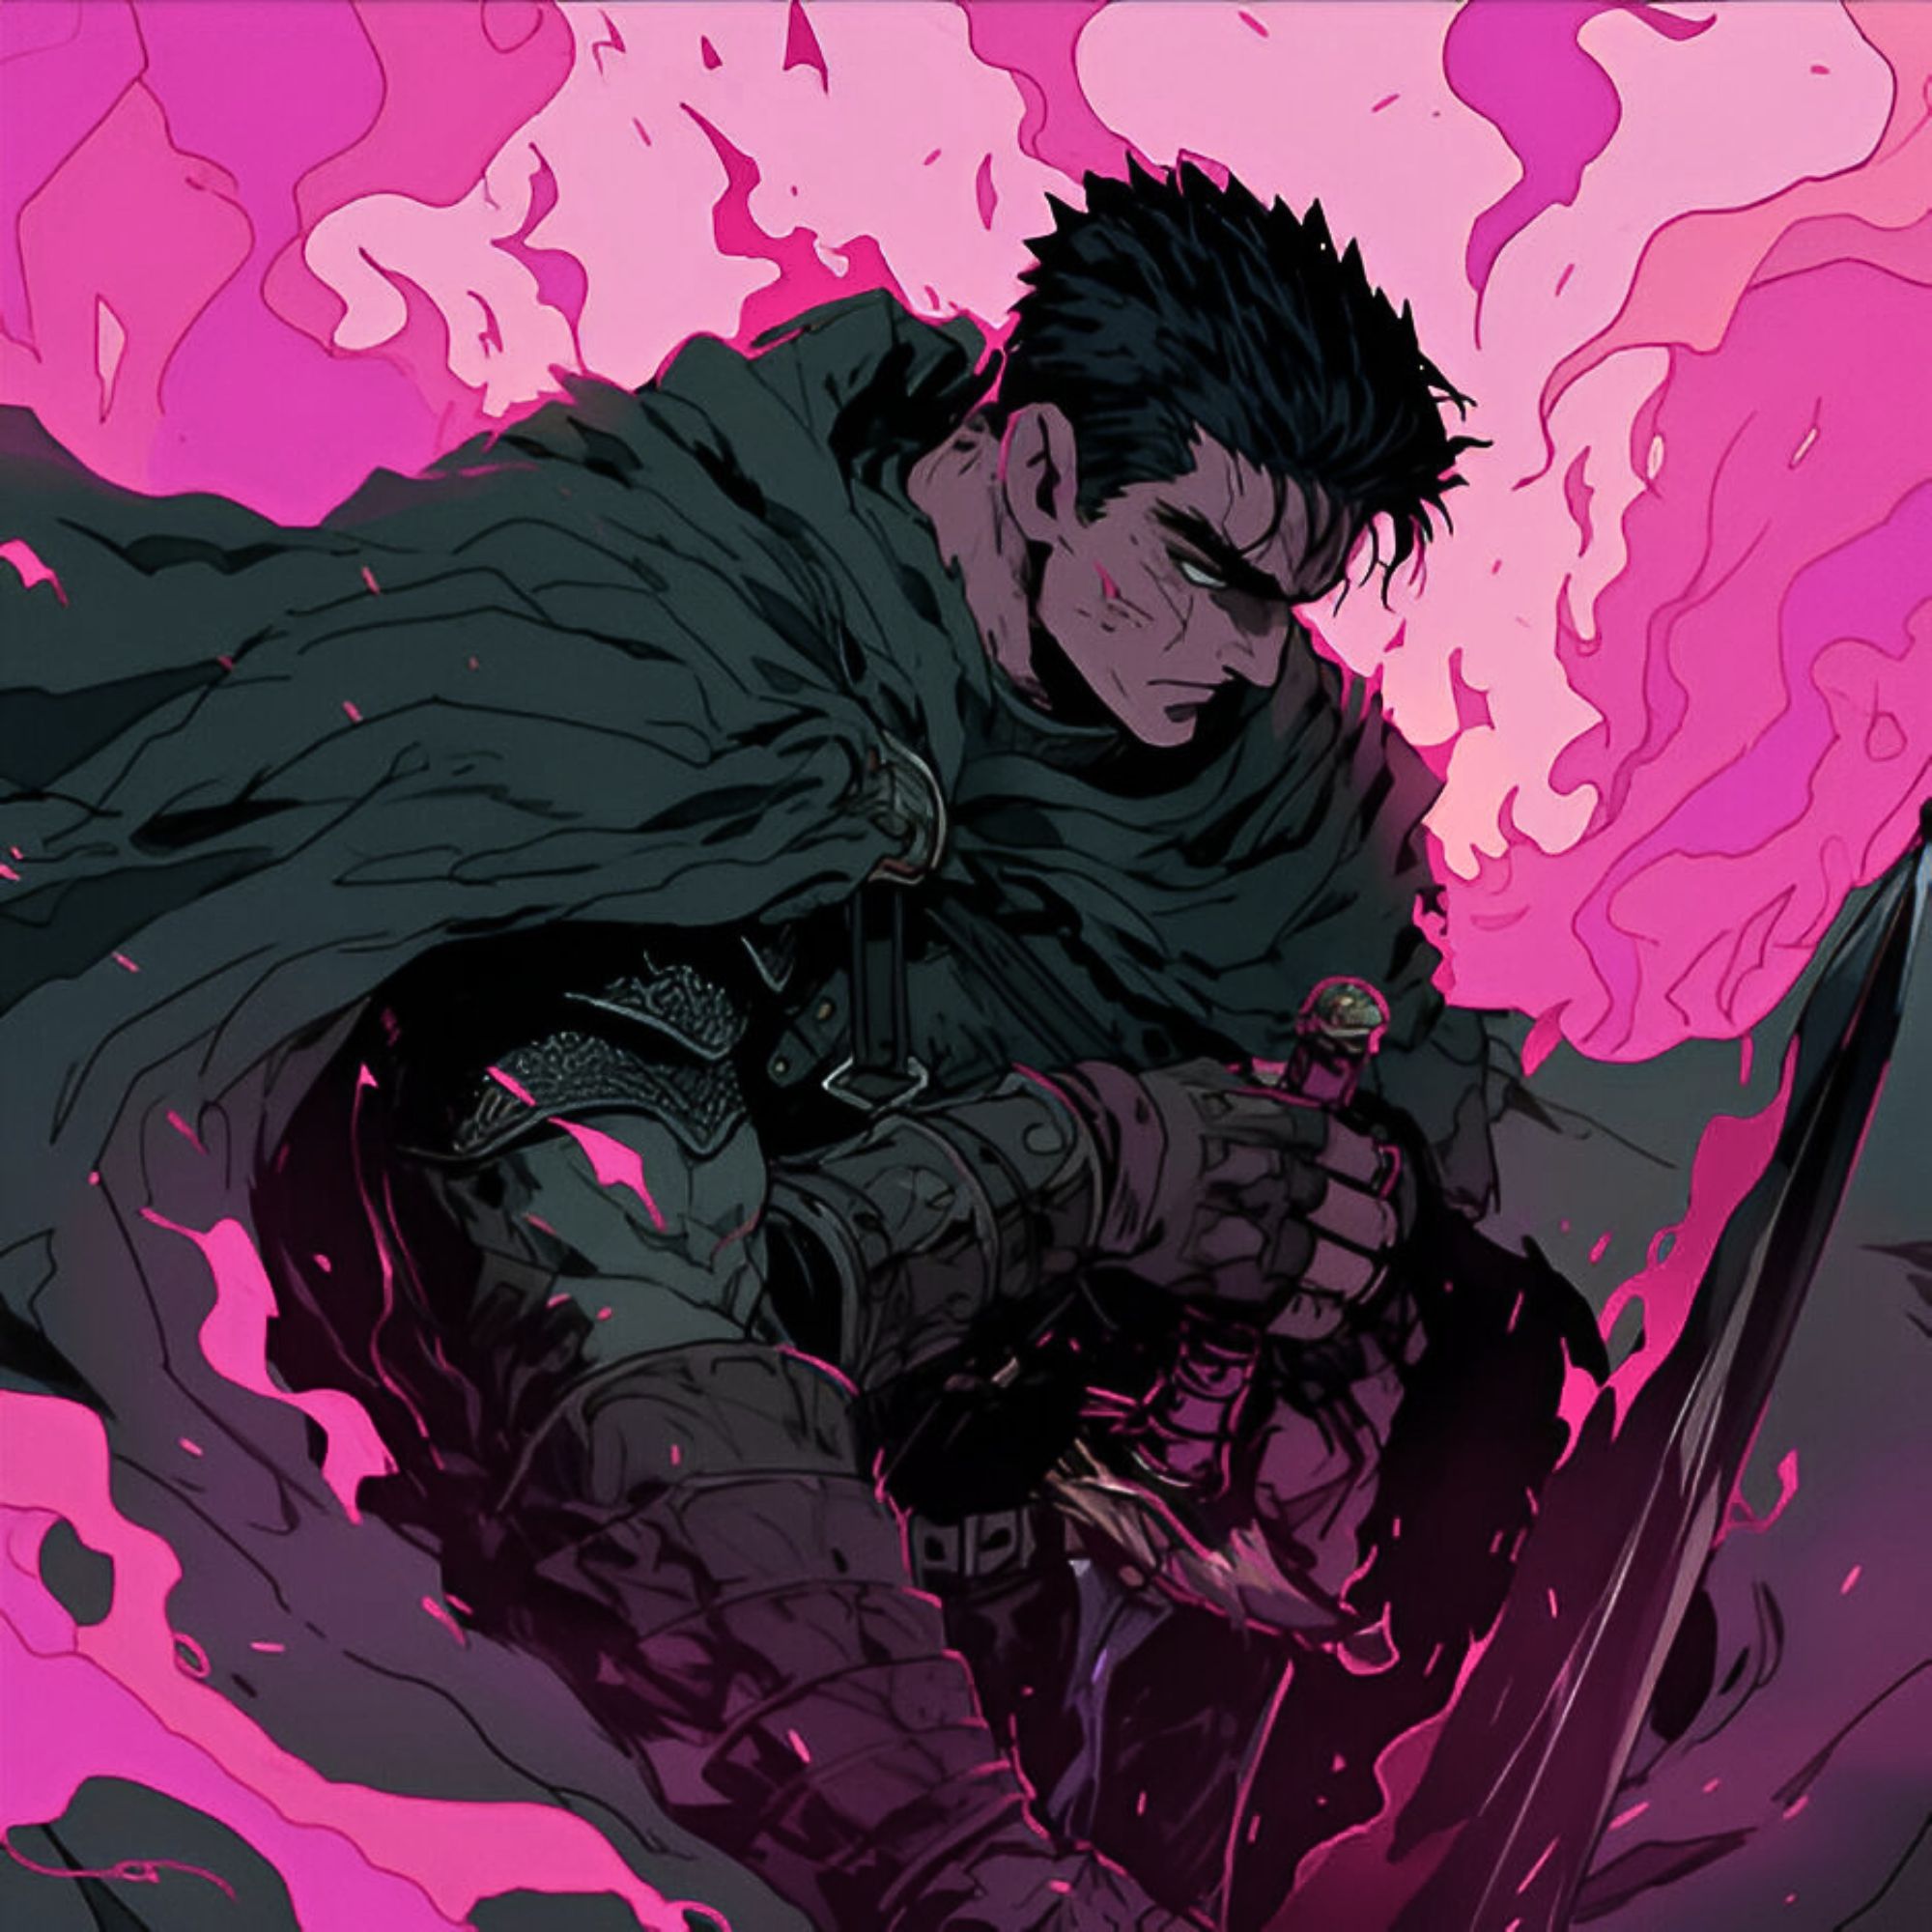 Guts and Griffith Matching Pfp